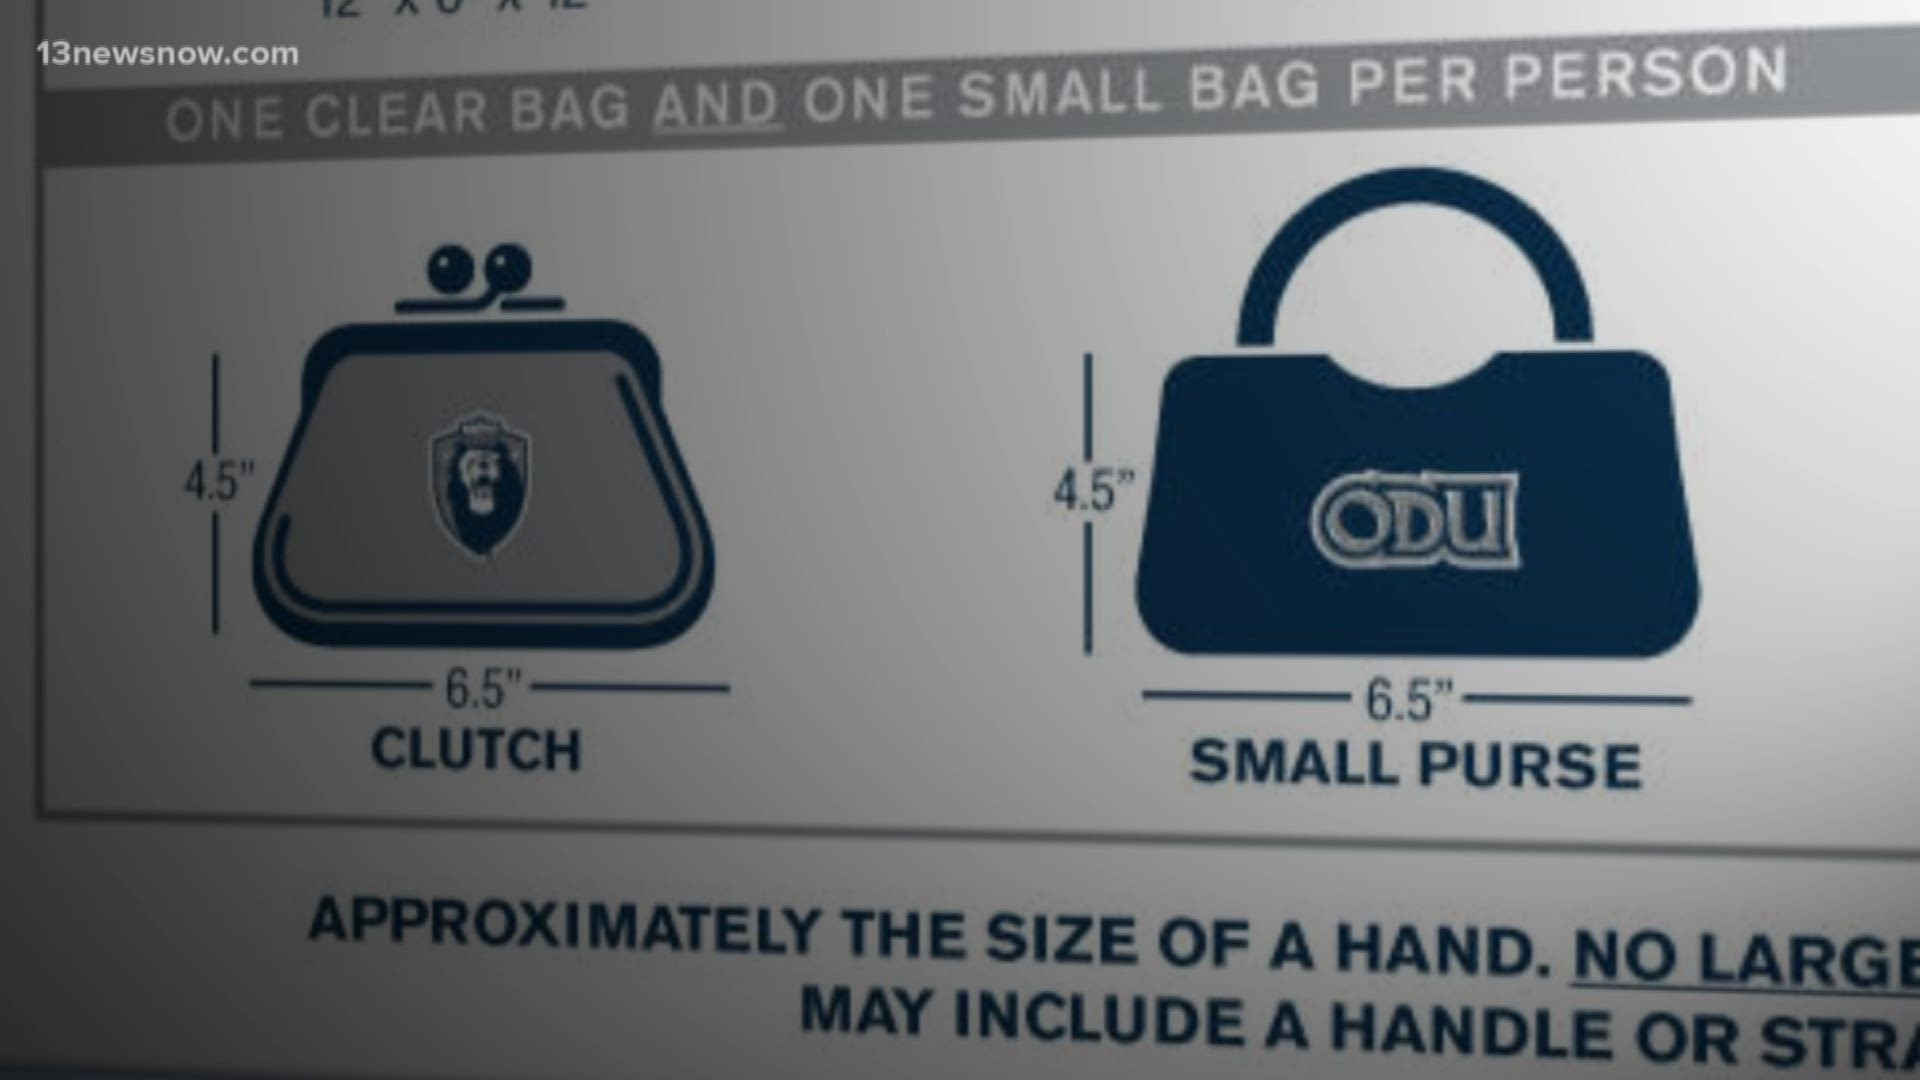 There is a new clear-bag policy being implemented this season. Spectators can bring a 12 by 6 clear tote or a one-gallon re-sealable clear plastic bag. You’re also allowed a 4 by 6 clutch or small purse, that doesn’t have to be clear. Seat cushions must be 16 by 16 and cannot have arms or pockets.